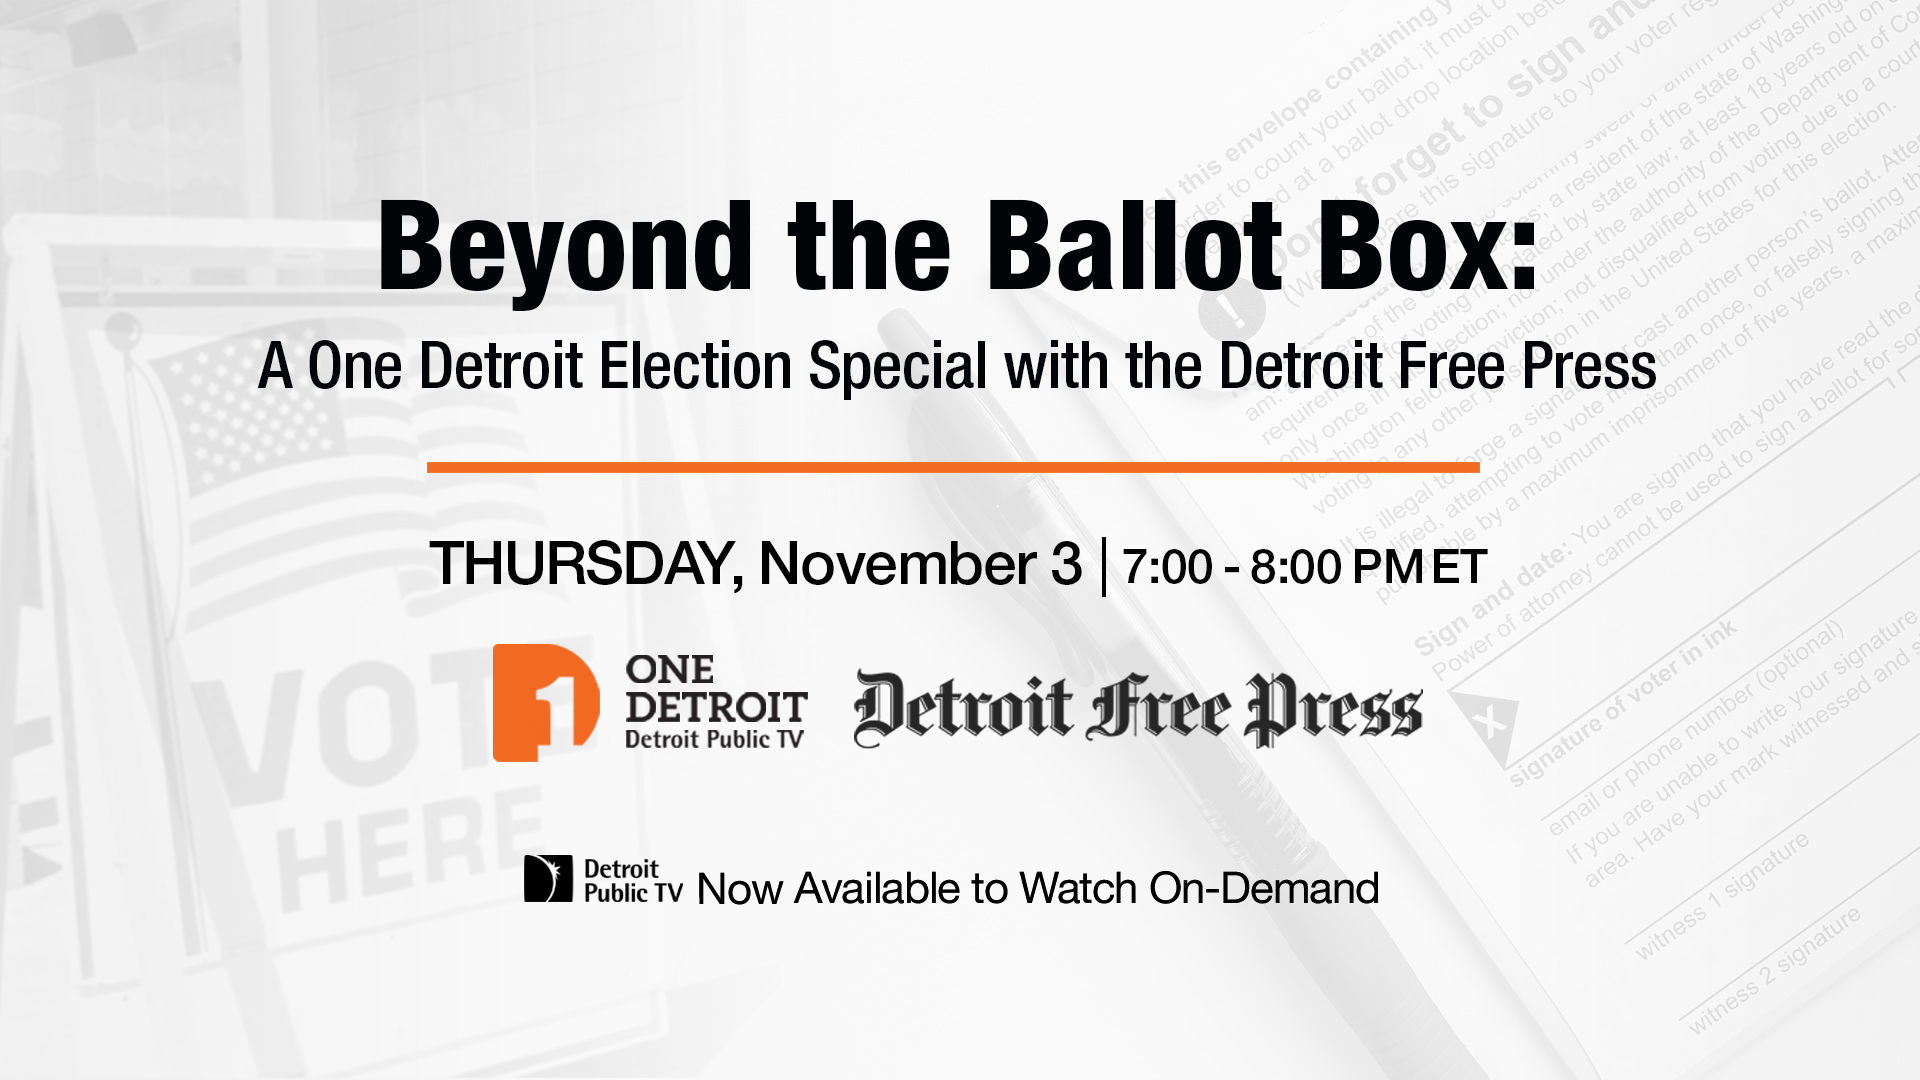 Beyond the Ballot Box An Election Special with Detroit Free Press